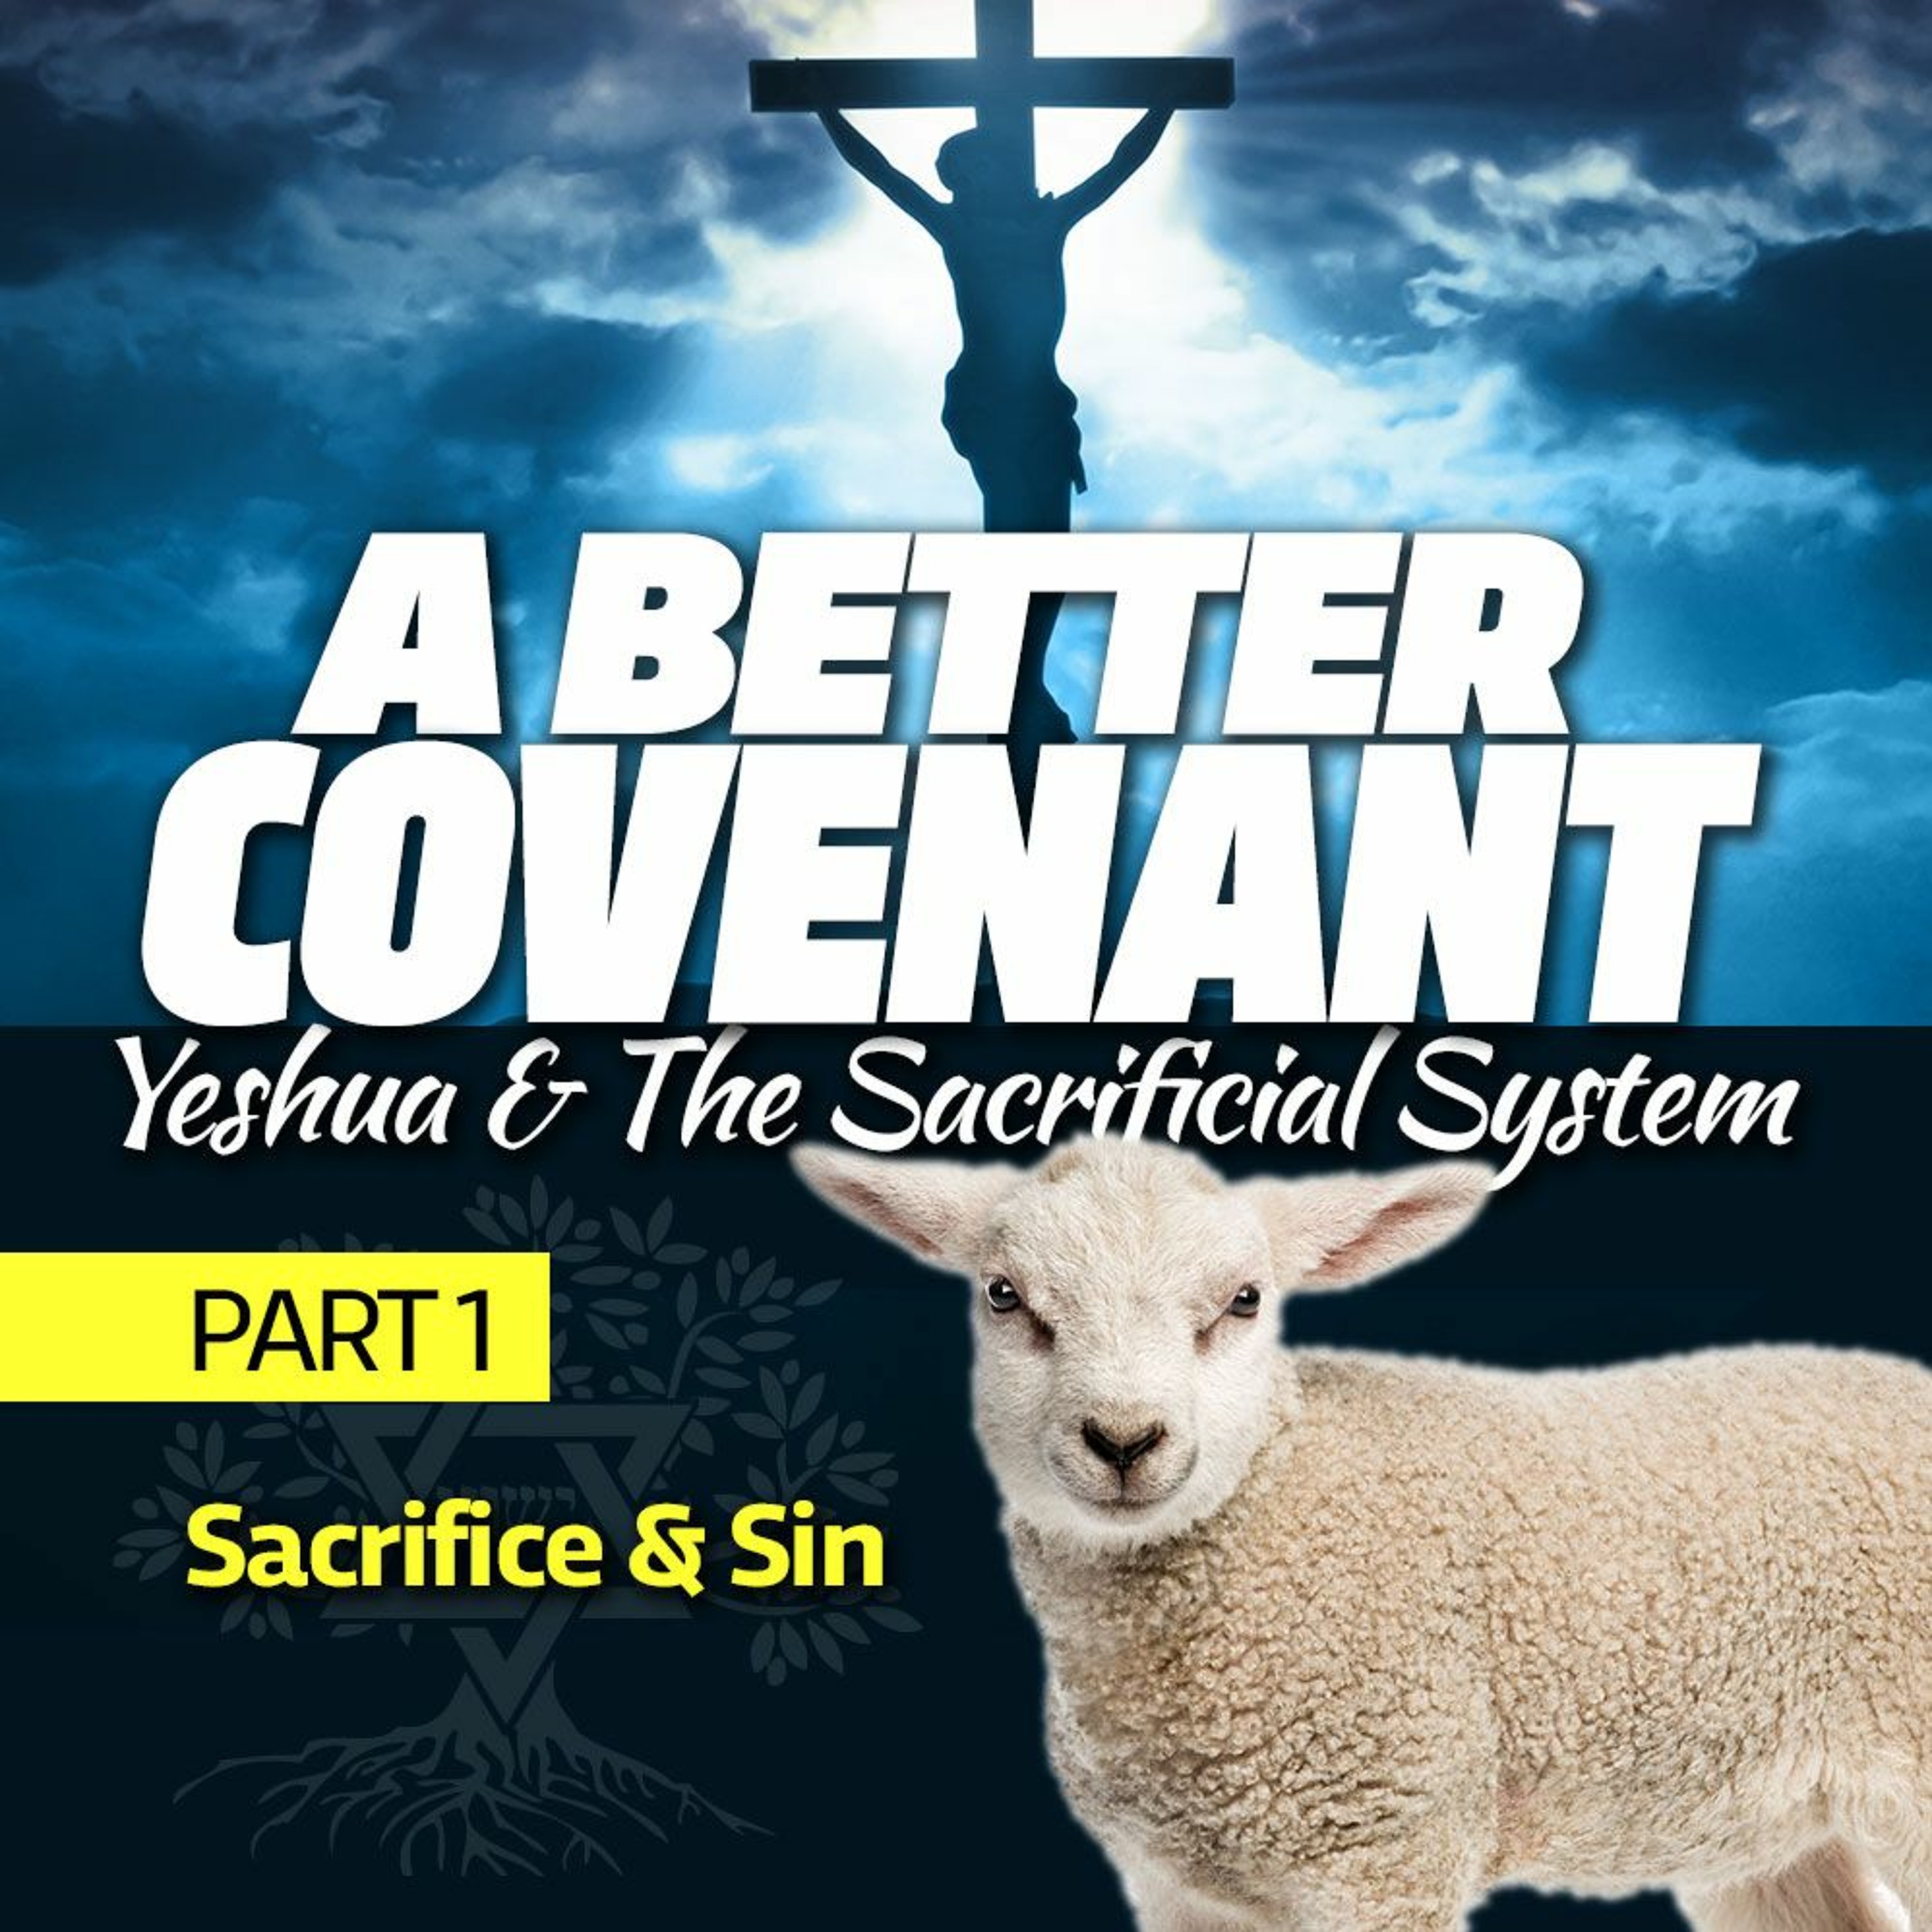 A Better Covenant: Yeshua & The Sacrificial System - Part 1